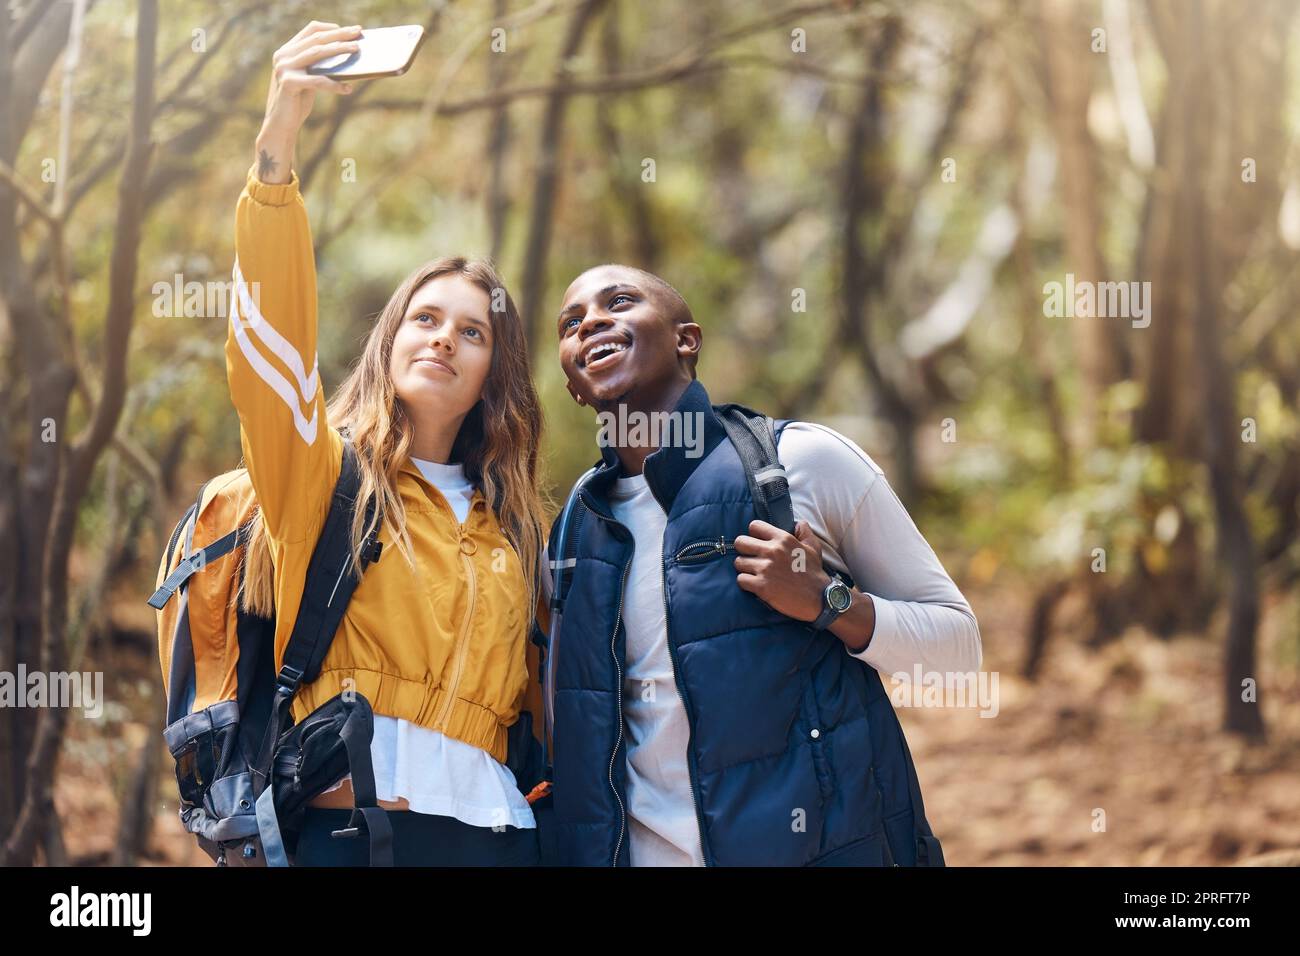 Selfie, happy couple and hiking adventure while holding phone for vacation travel memories in a forest or woods. Happy, love and exercise in healthy relationship with black man and white woman Stock Photo